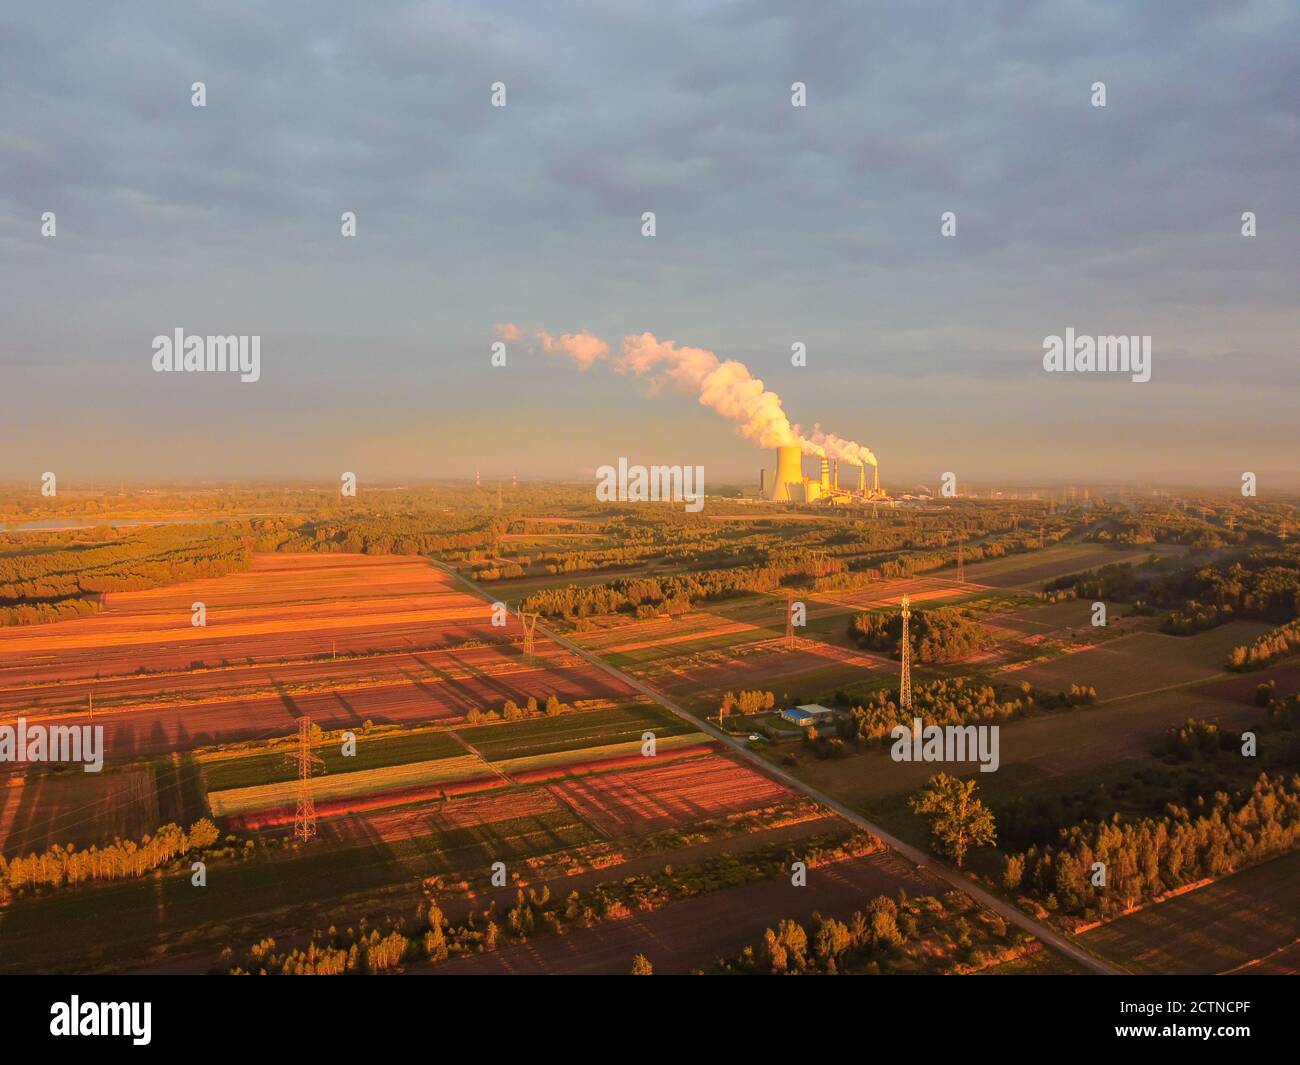 Agricultural fields with large power plant in a distance. Drone, aerial view. Stock Photo